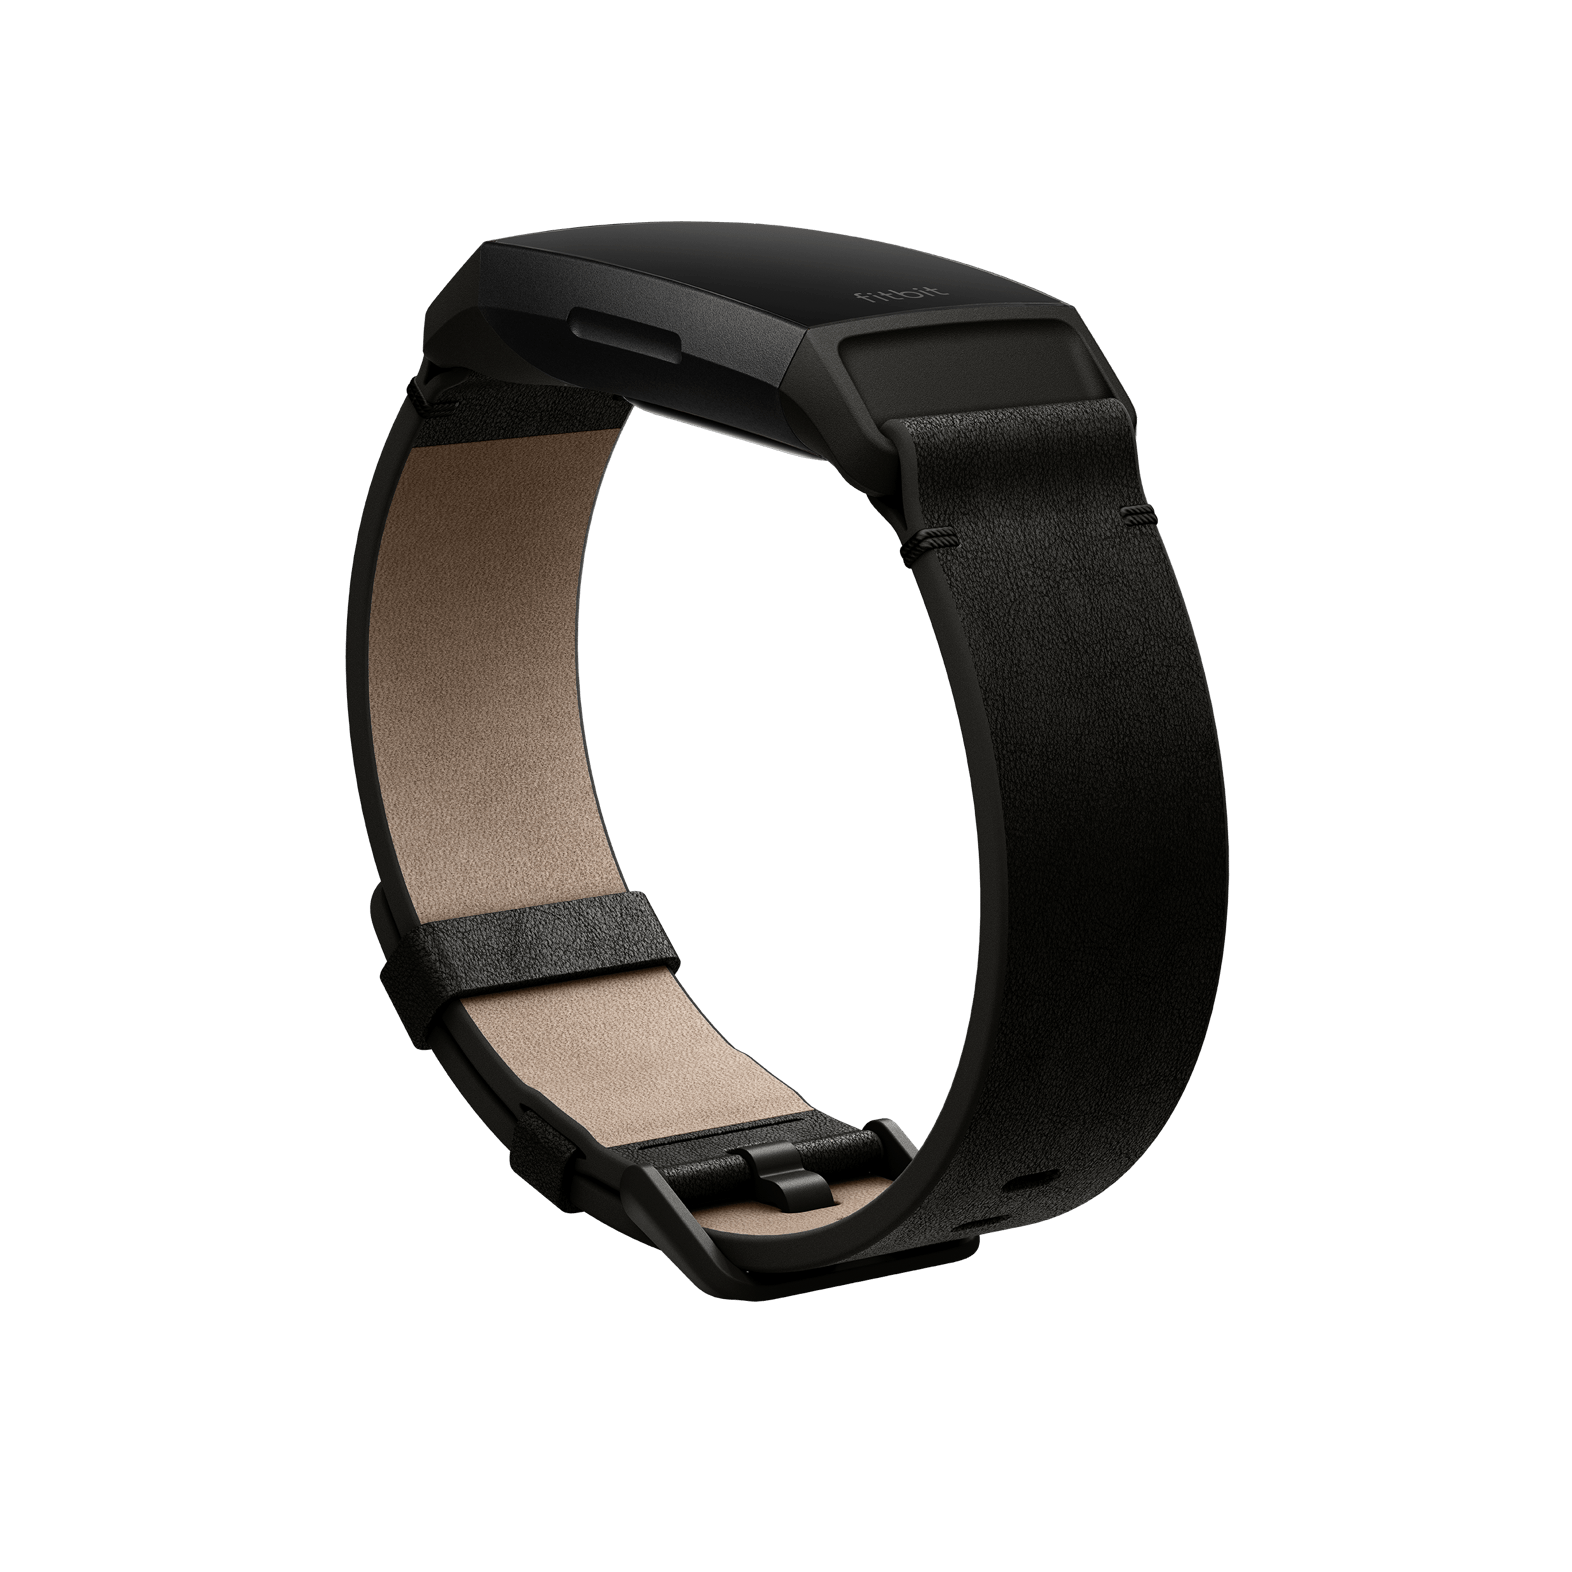 Bronze Brown Genuine Leather Band For Fitbit Charge 3 Handmade Double Wrap Adjustable Strap Fitbit Charge 3 Bracelet Stainless Steel Fitbit Charge 3 Leather Band for Women